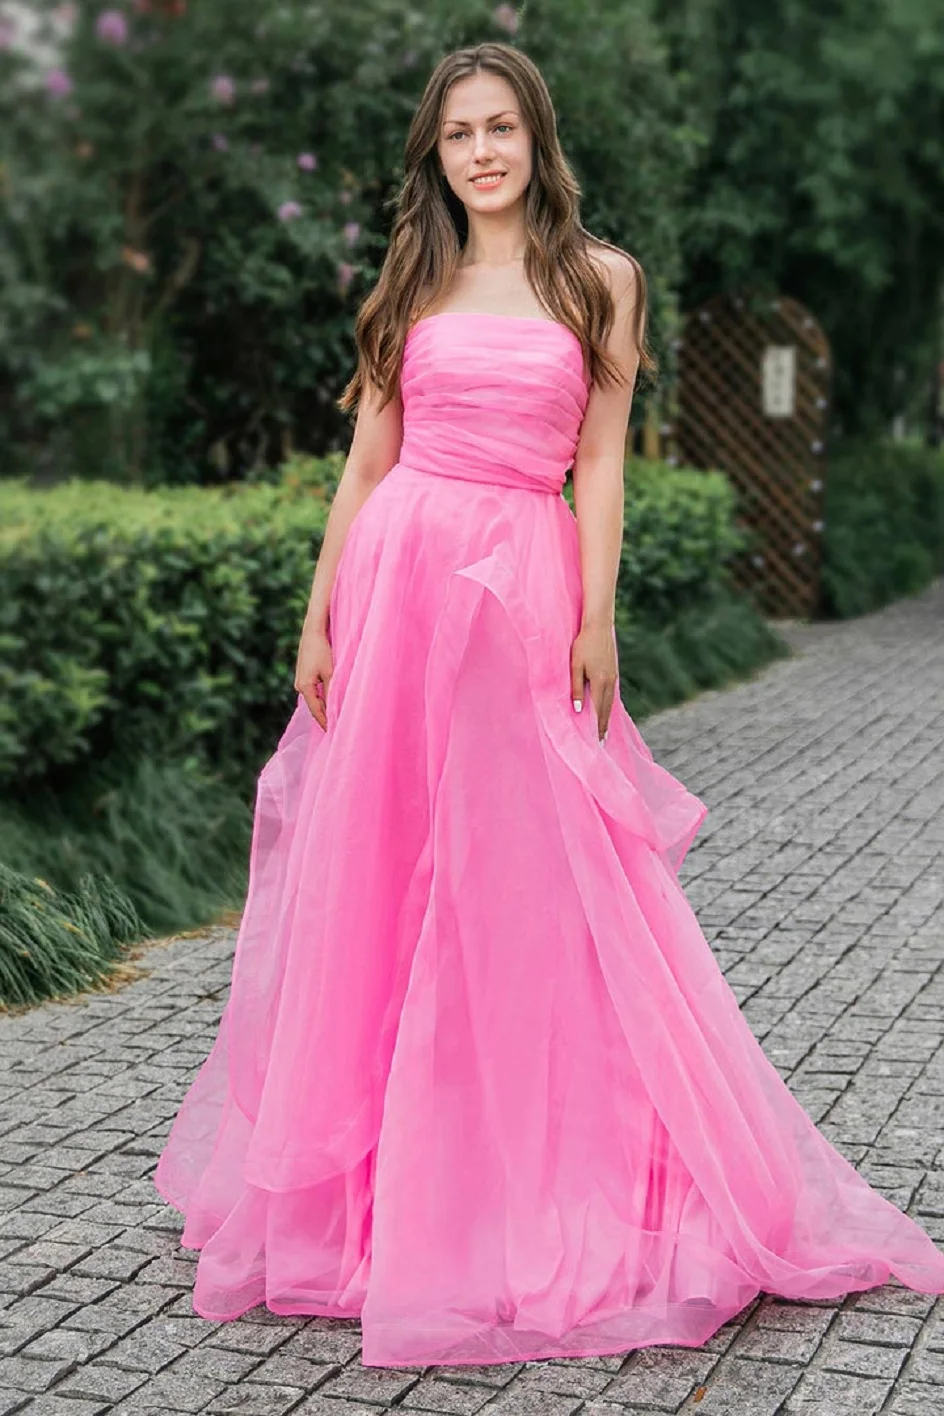 

Strapless Long Pink Prom Dress Corset Bodice Floor Length Homecoming Gowns Elegant A-Line Evening Party Dresses for Women 2024